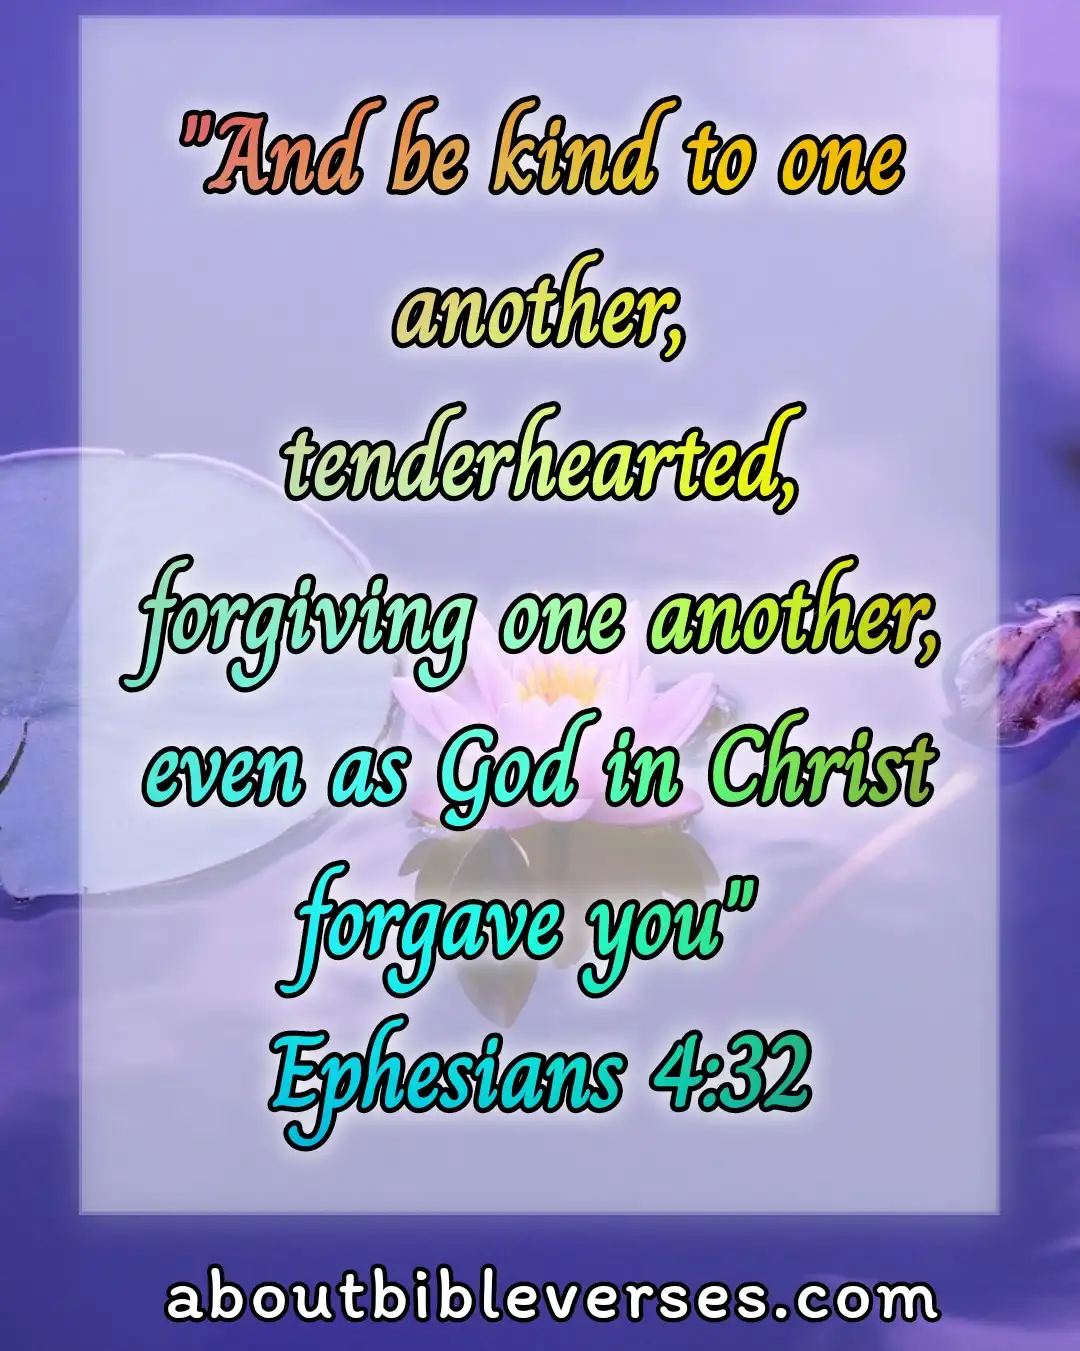 bible verses Helping To others (Ephesians 4:32)